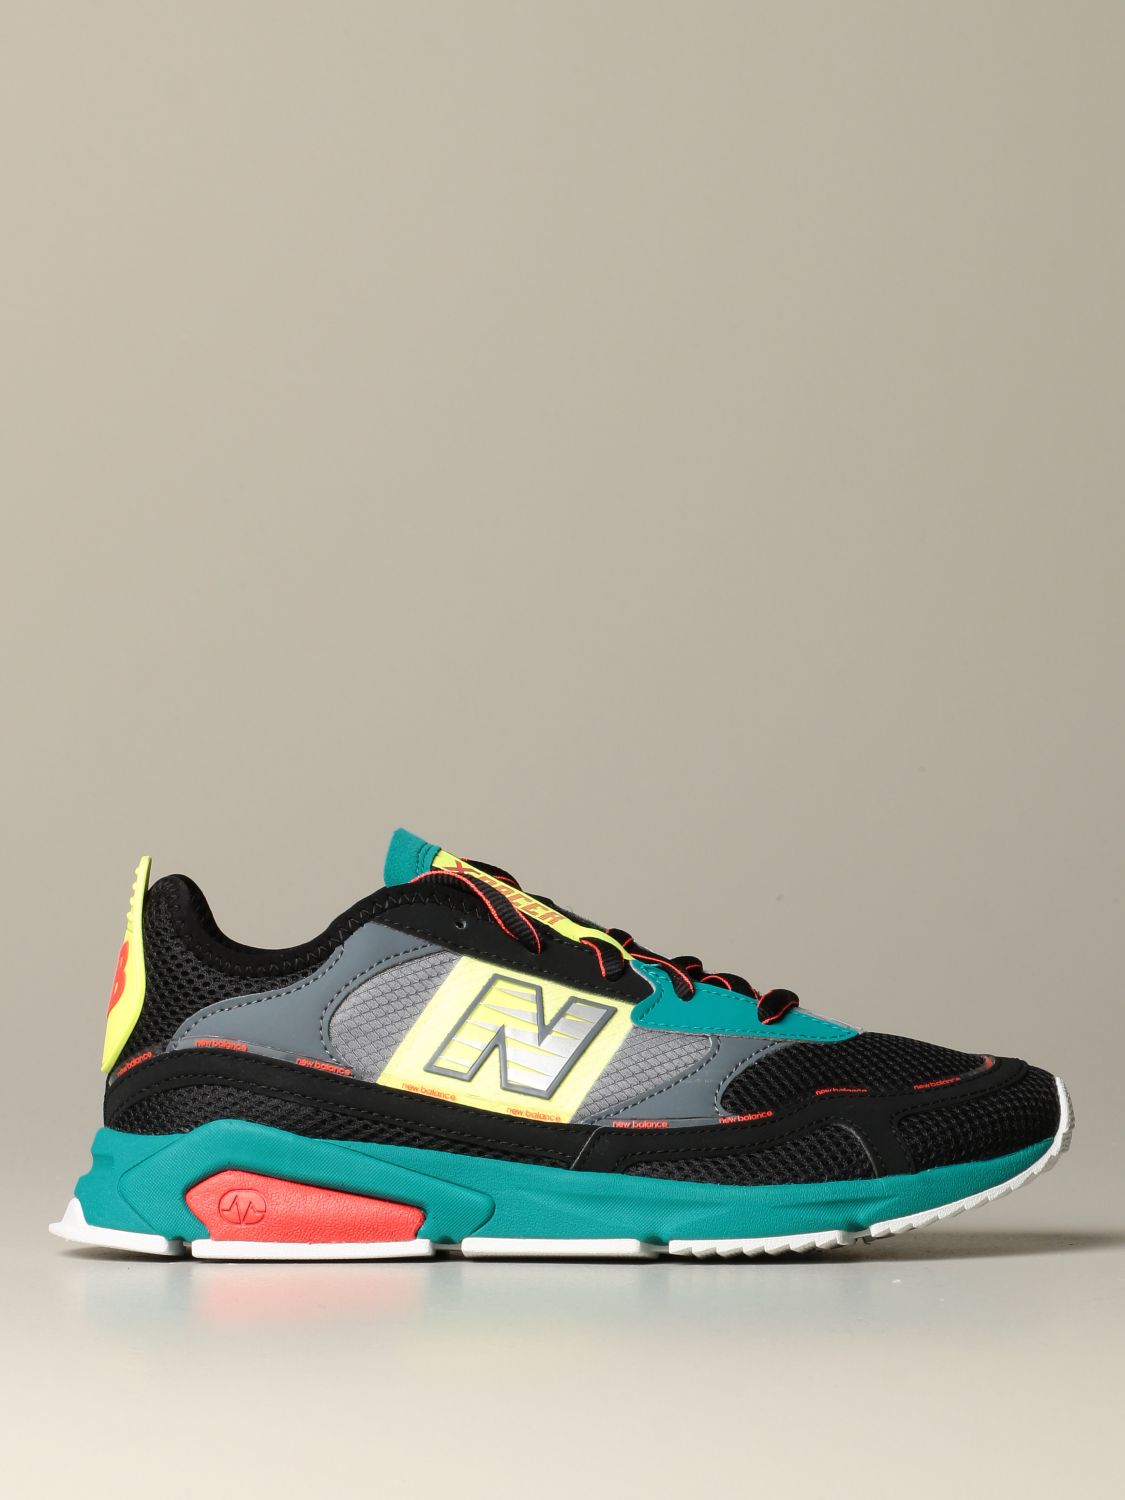 New Balance X Racer sneakers with N logo